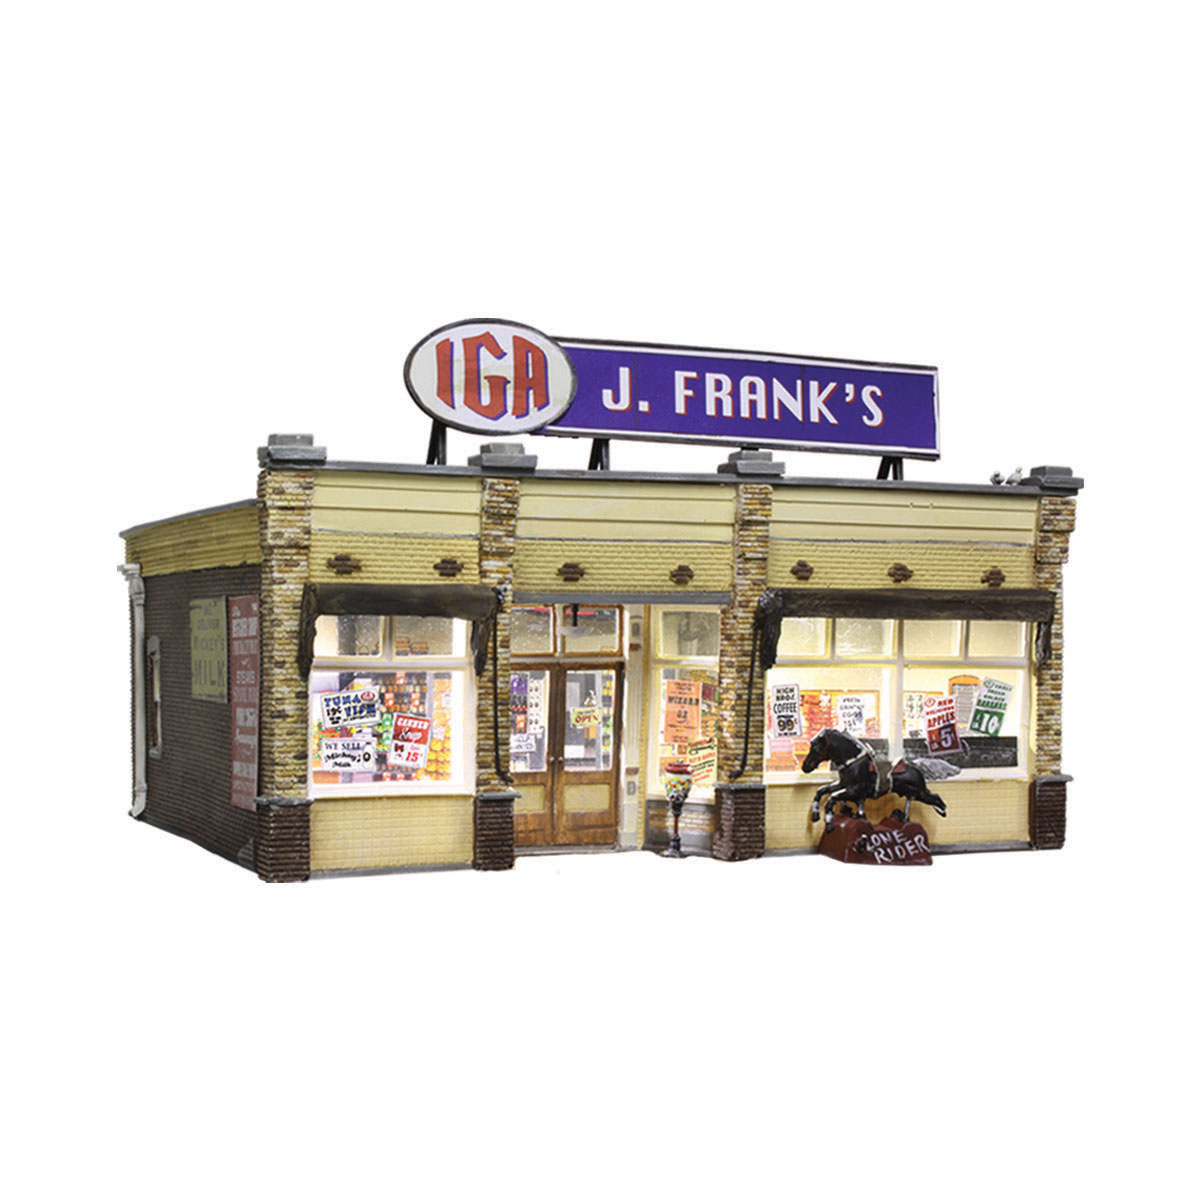 Frank's IGA Grocery for sale online Woodland Scenics N Scale Br4941 J 